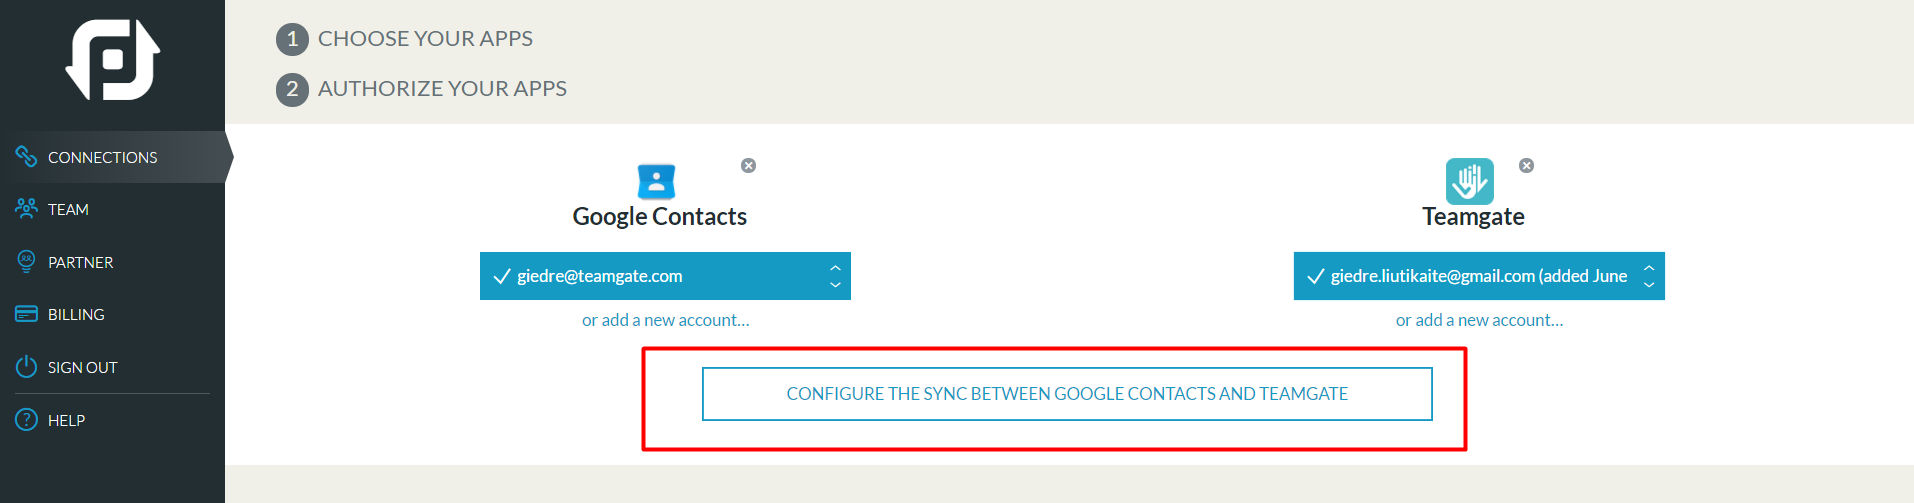 configure-the-sync-between-google-contacts-and-teamgate-piesync.png